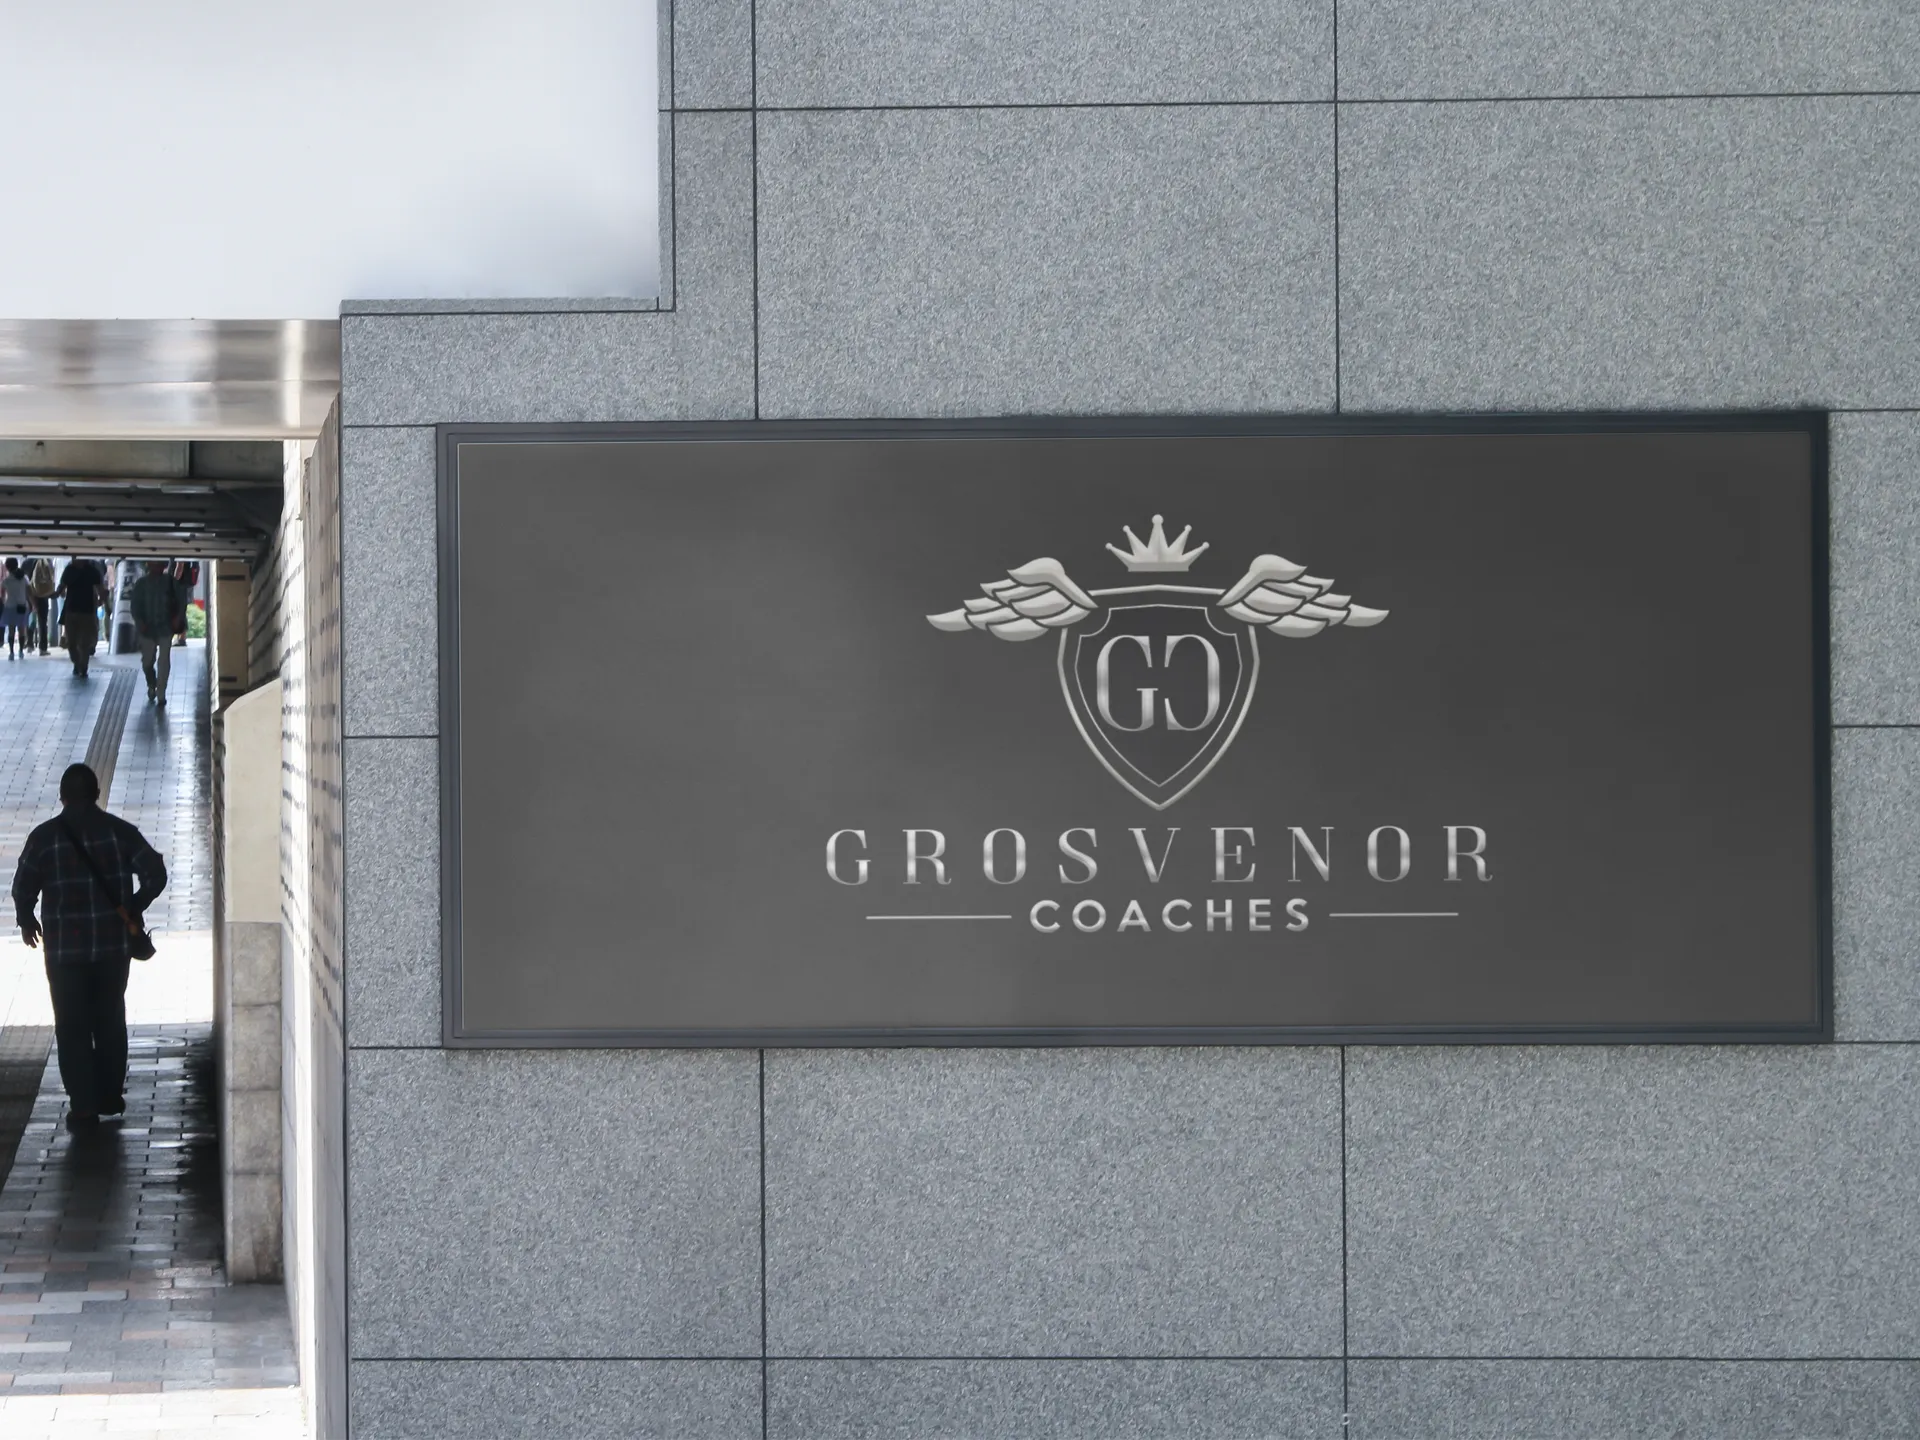 Grosvenor Coaches sign on a wall outside